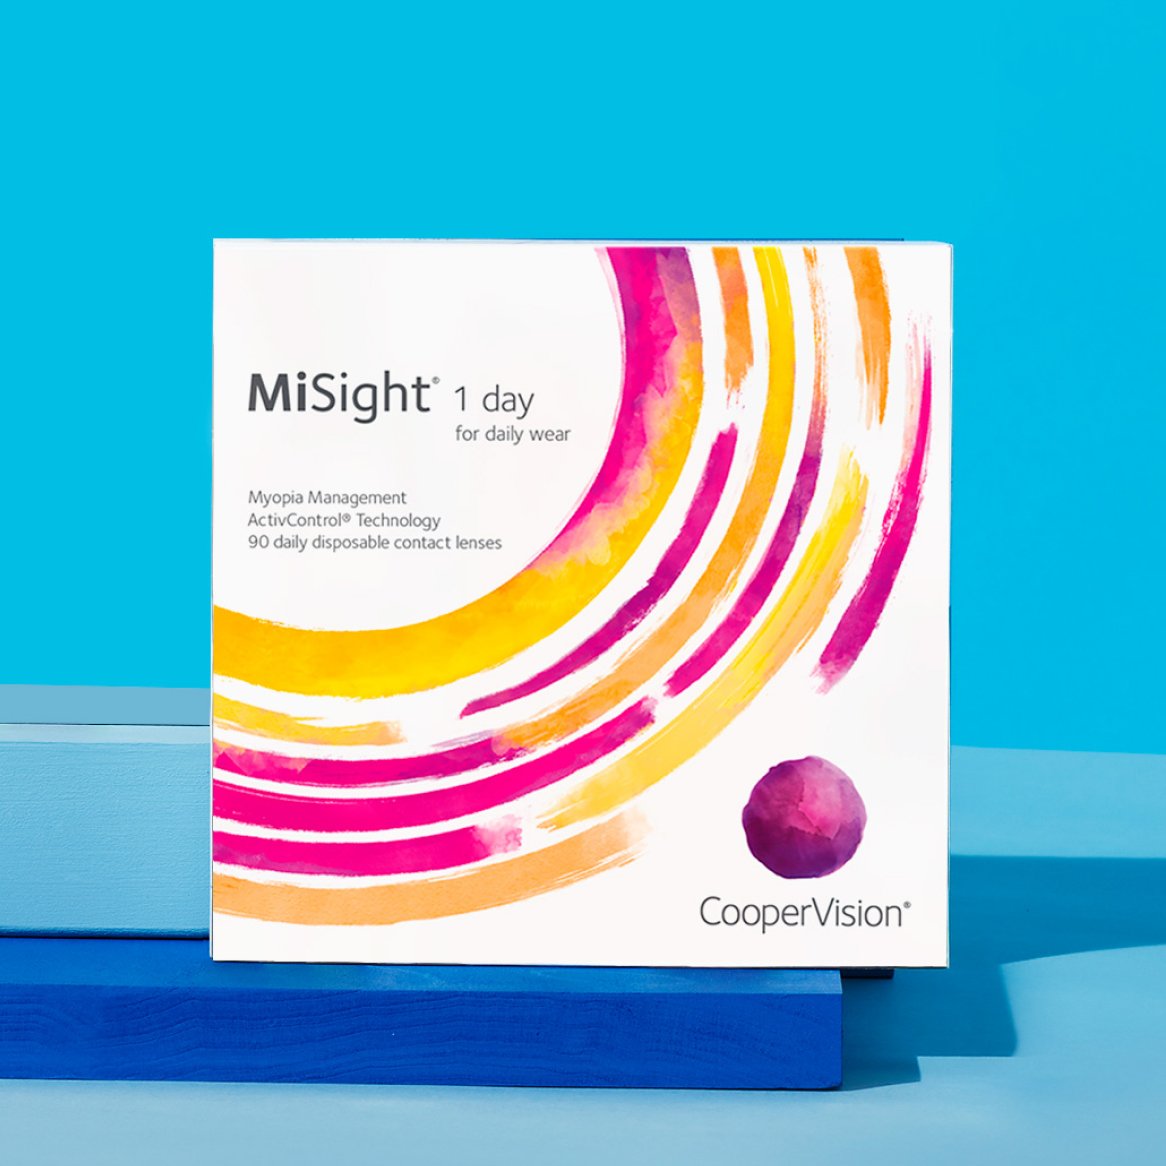 A box of MiSight contact lenses